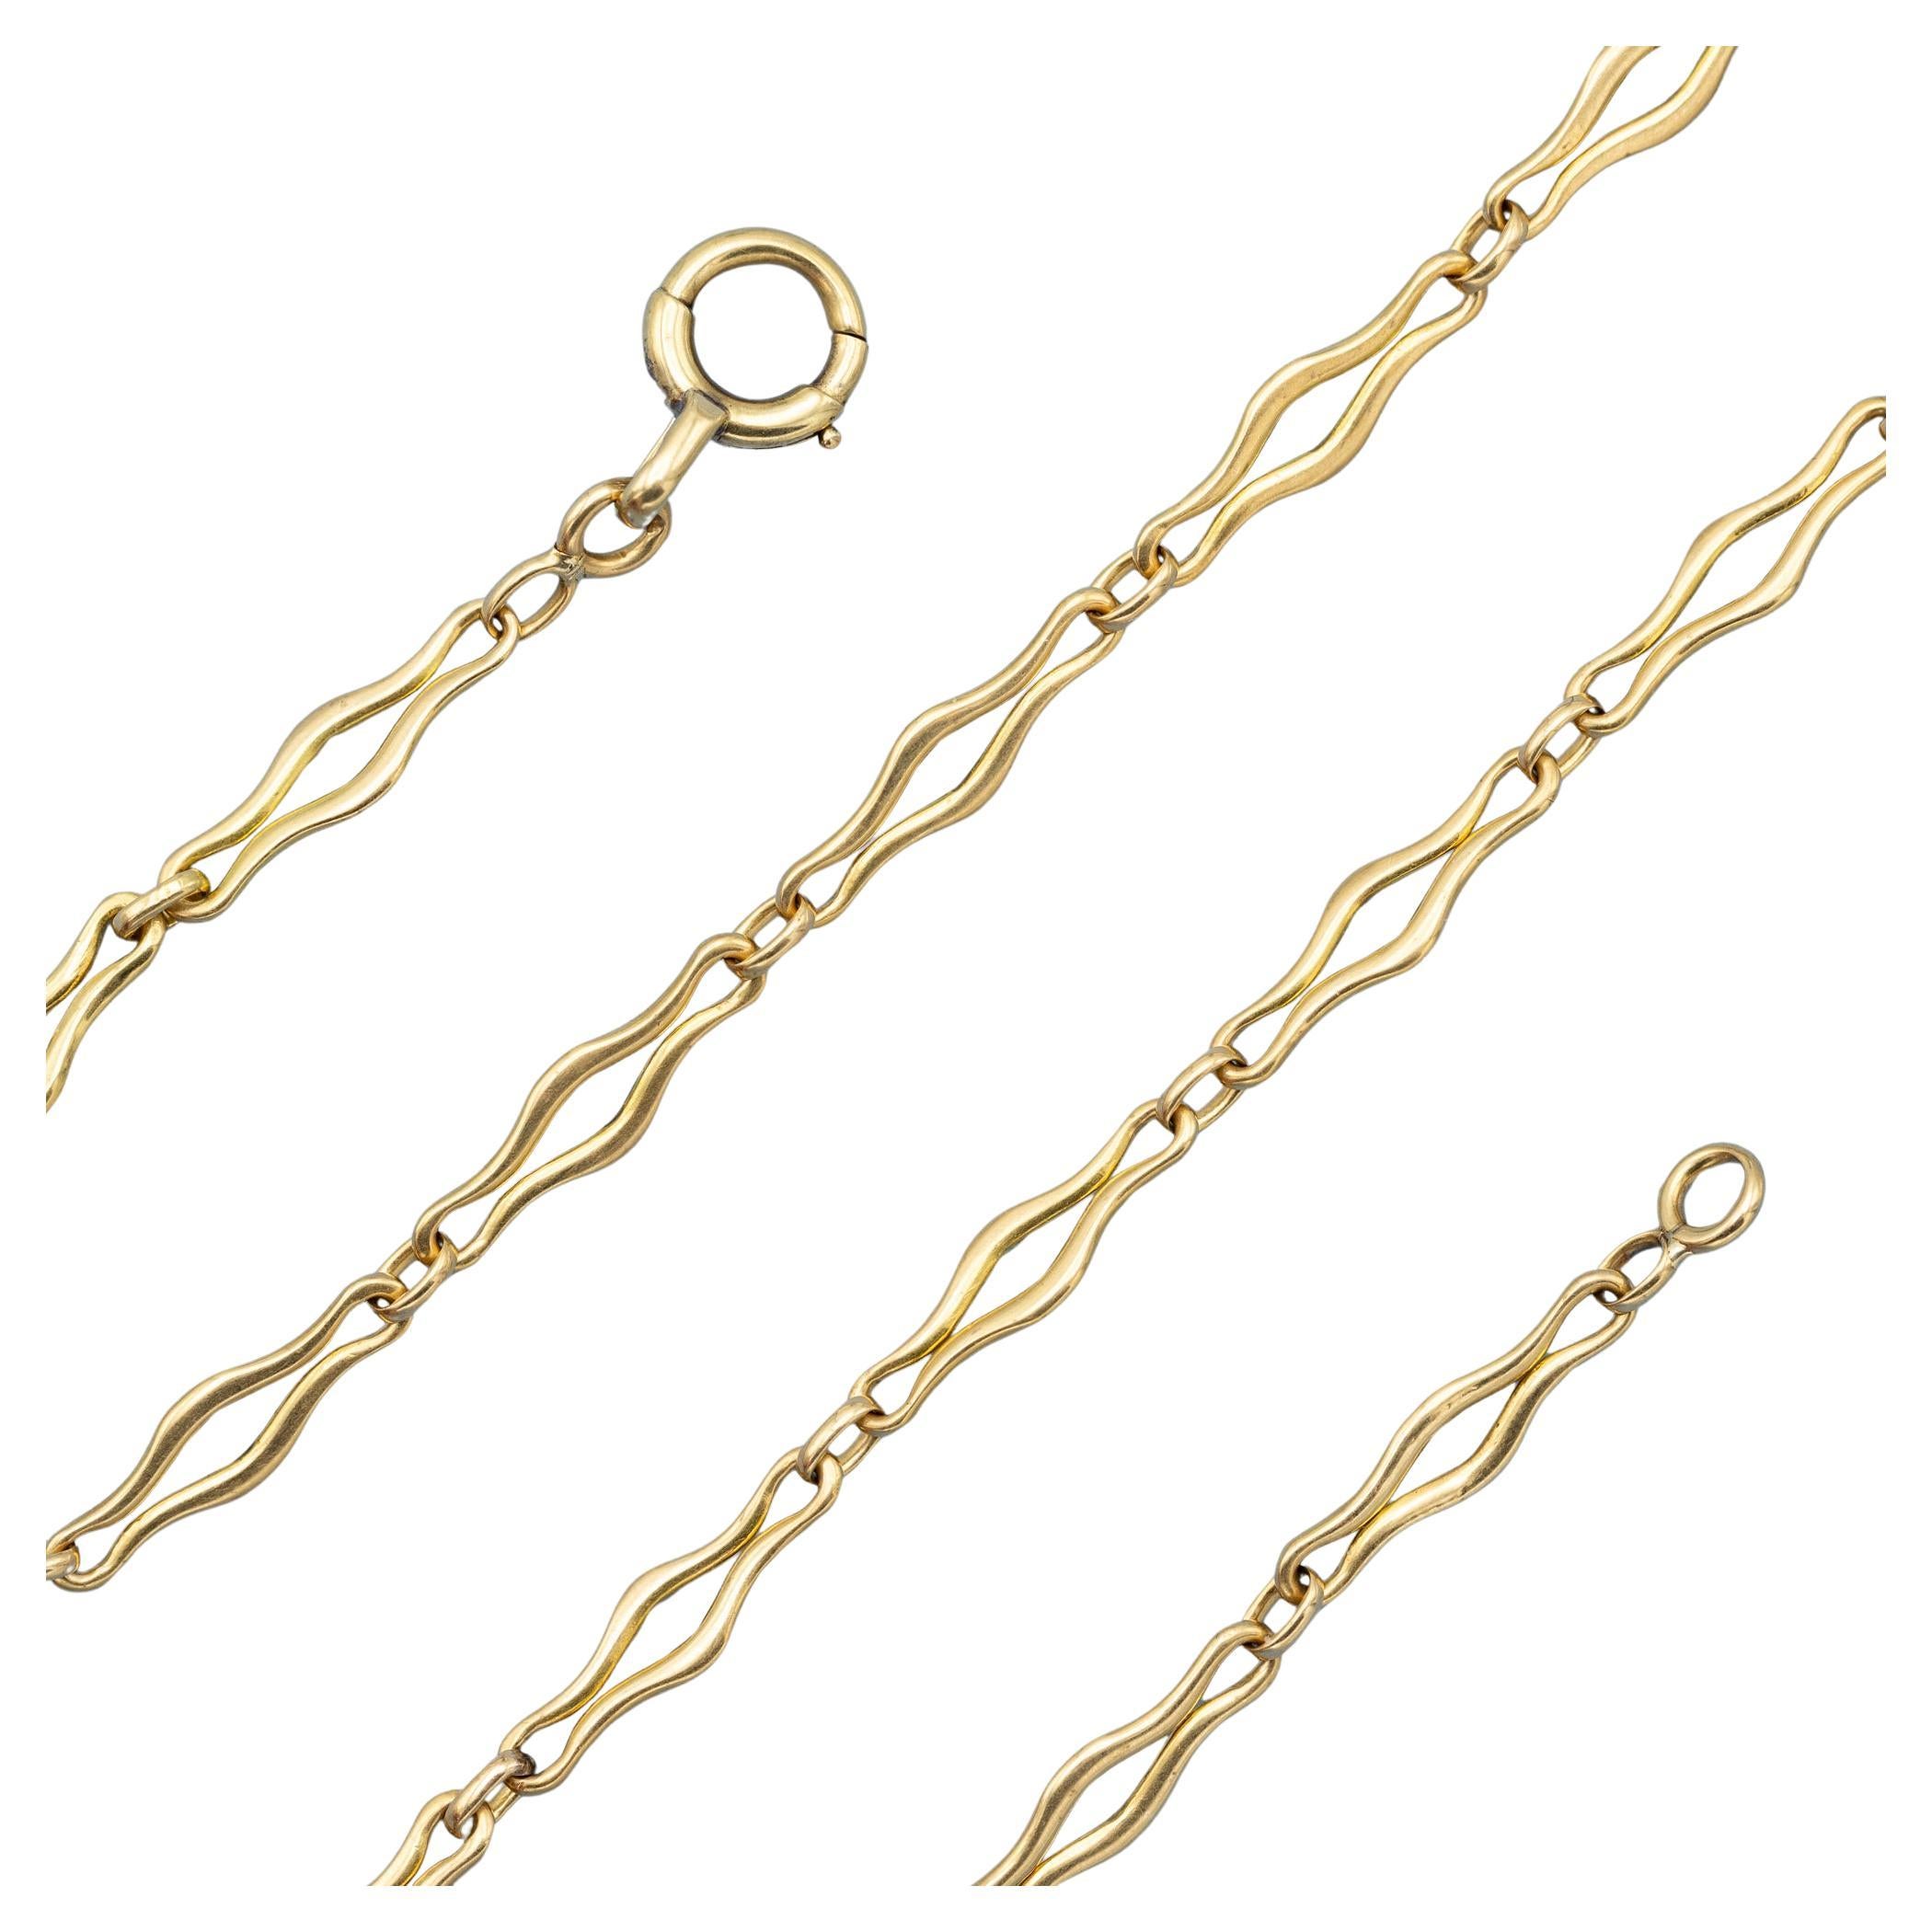 18K French solid gold pocket watch chain - unique Antique Necklace - 16.34 Inch For Sale